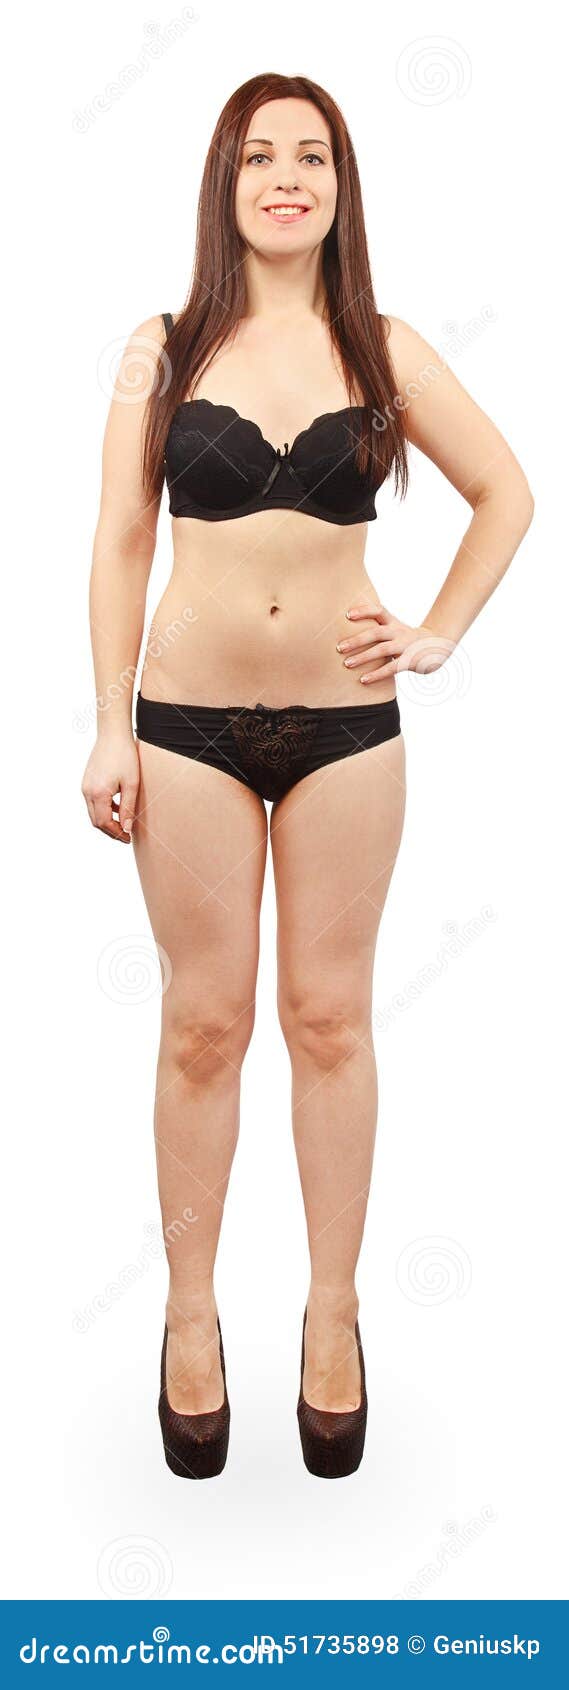 Front View of Full Body Smiling Woman with Black Underwear Stock Photo -  Image of girl, portrait: 51735898